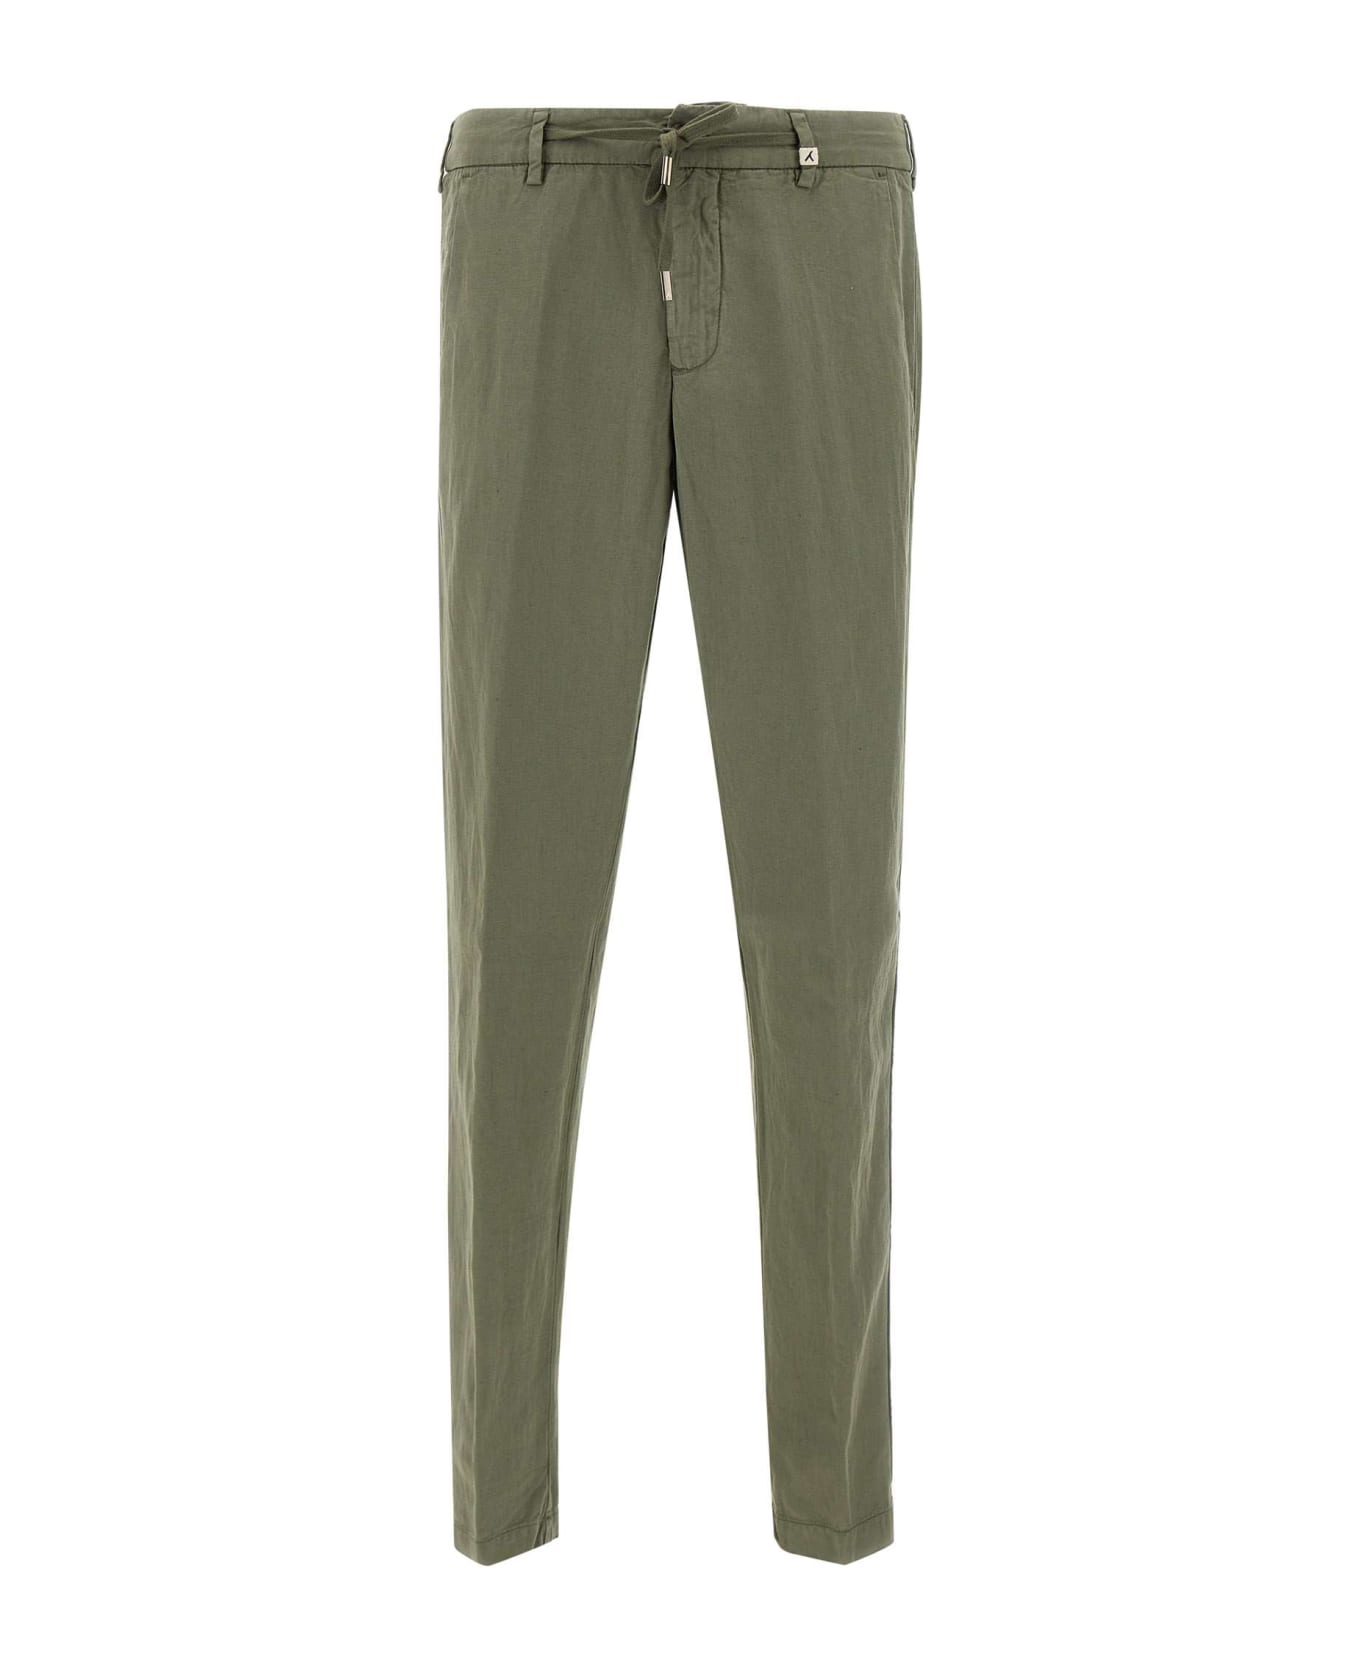 Myths "apollo" Linen And Cotton Trousers - GREEN